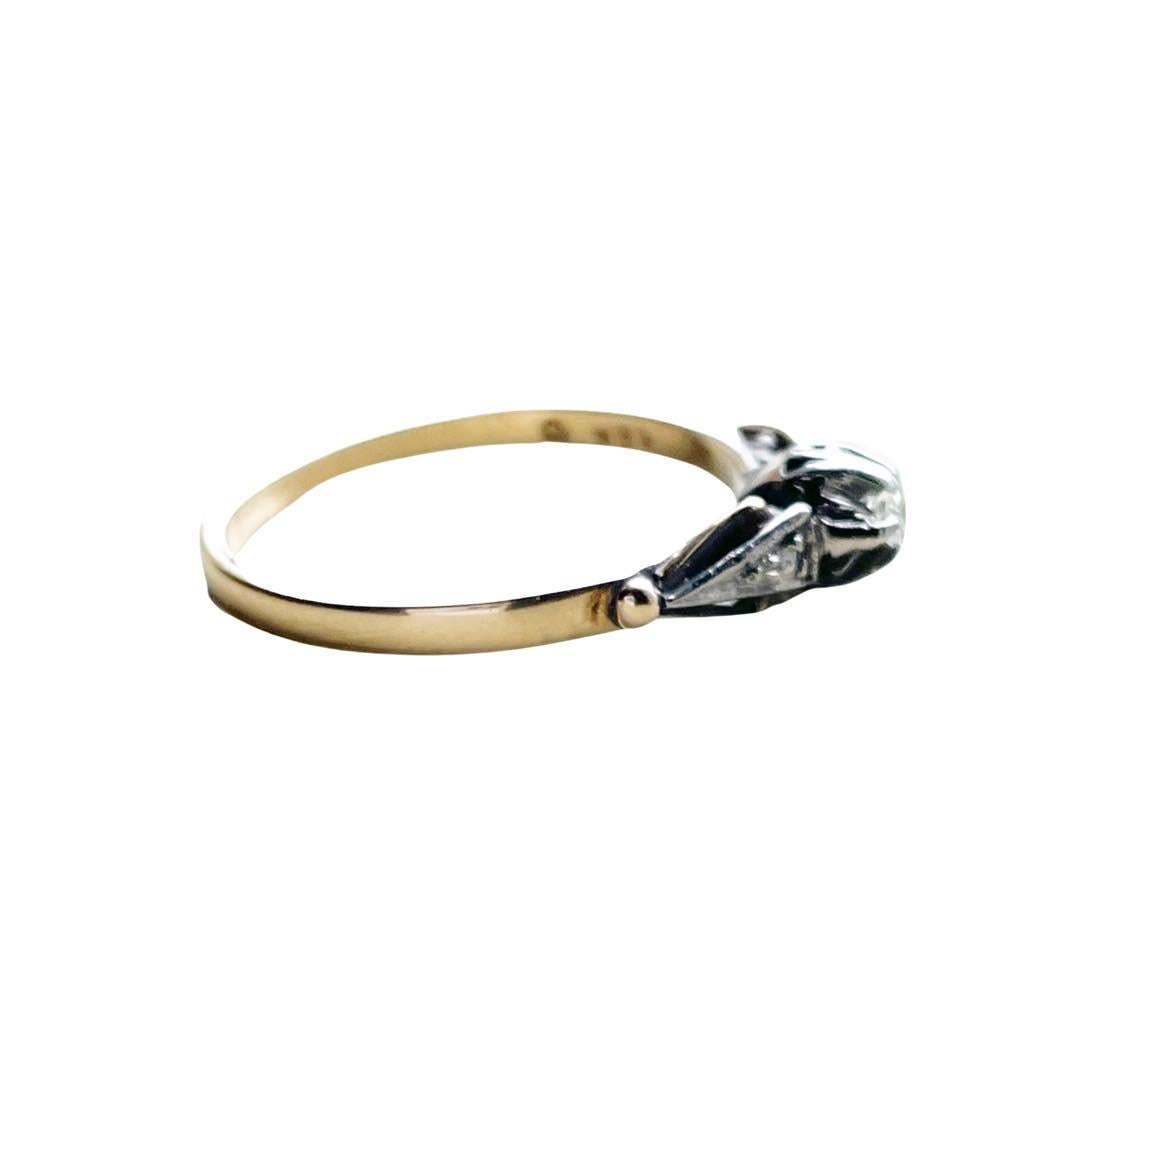 This dainty vintage beauty is crafted in 18K white gold and yellow gold. The classic smooth shank is yellow gold which intertwines with the white gold giving an elegant two tone look. In the center of the belcher setting is a round brilliant cut